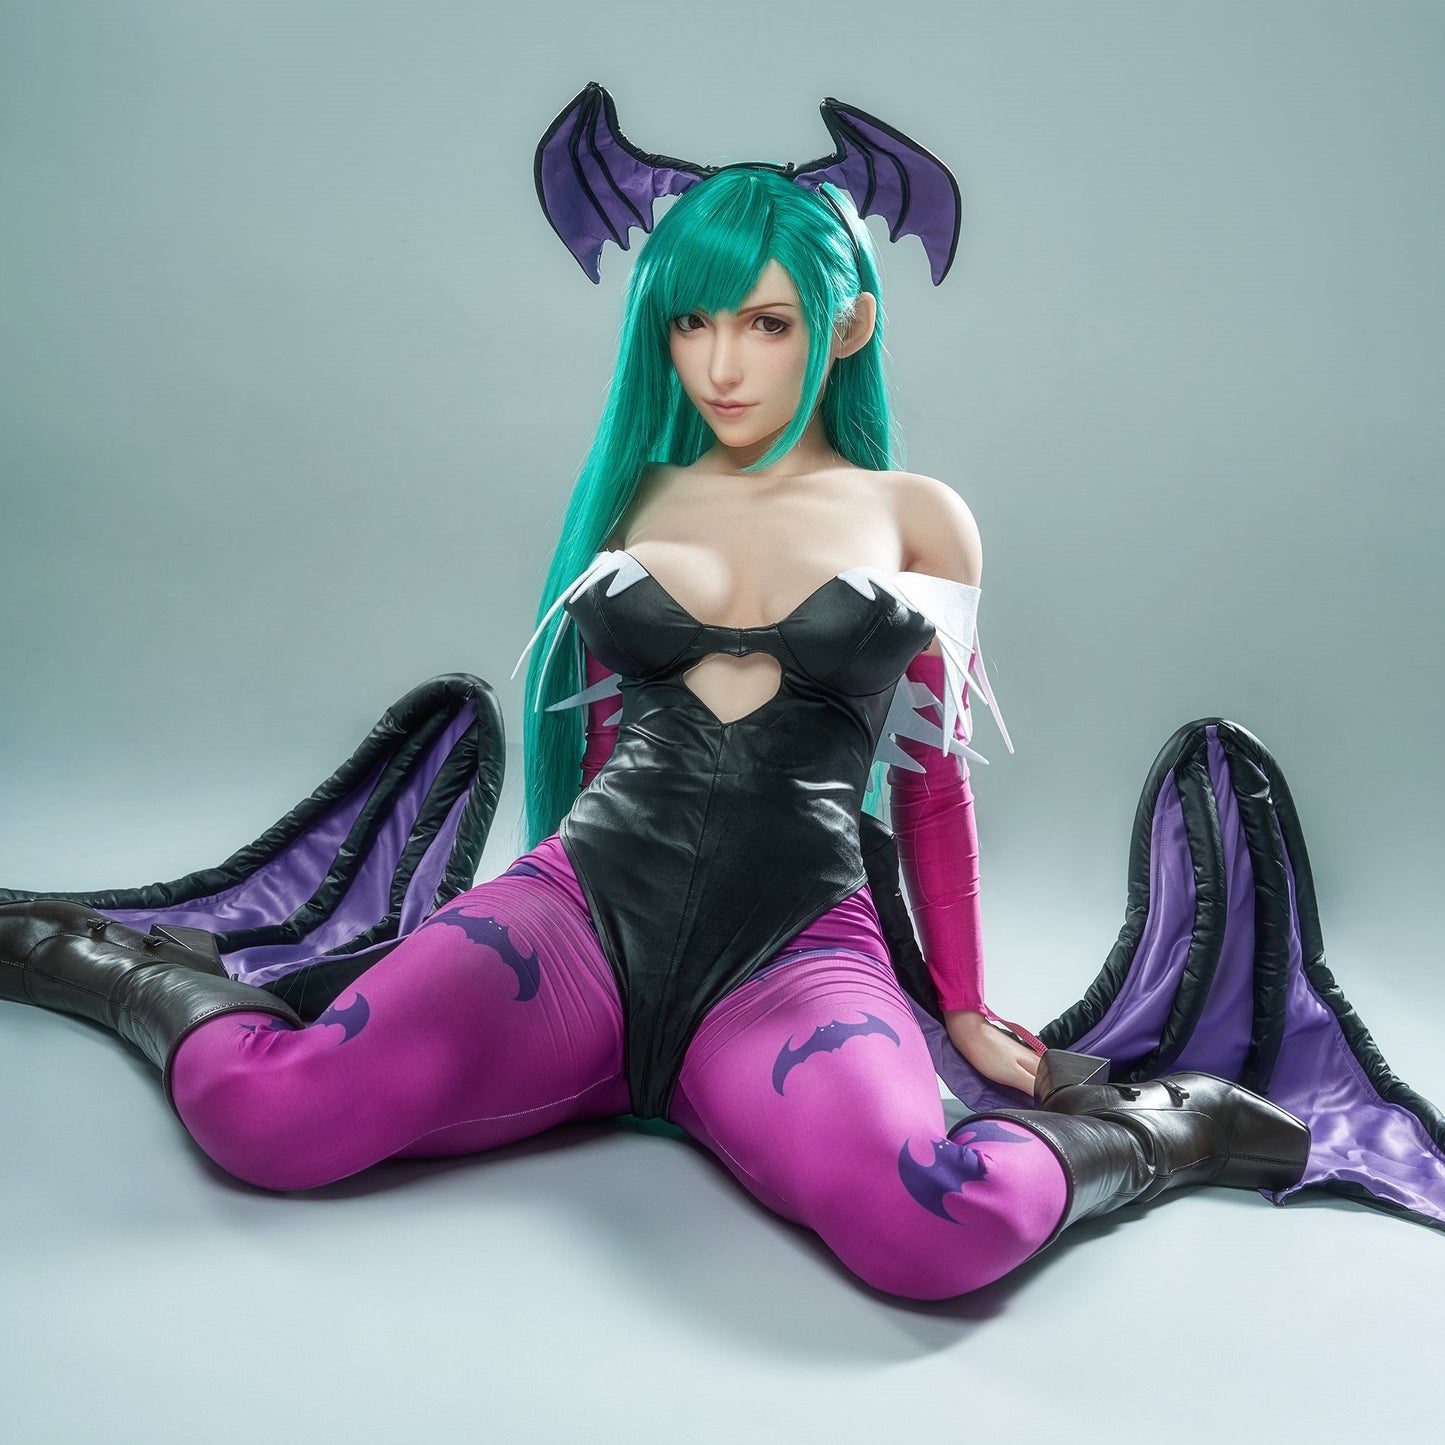 Game Lady - Morrigan Outfit